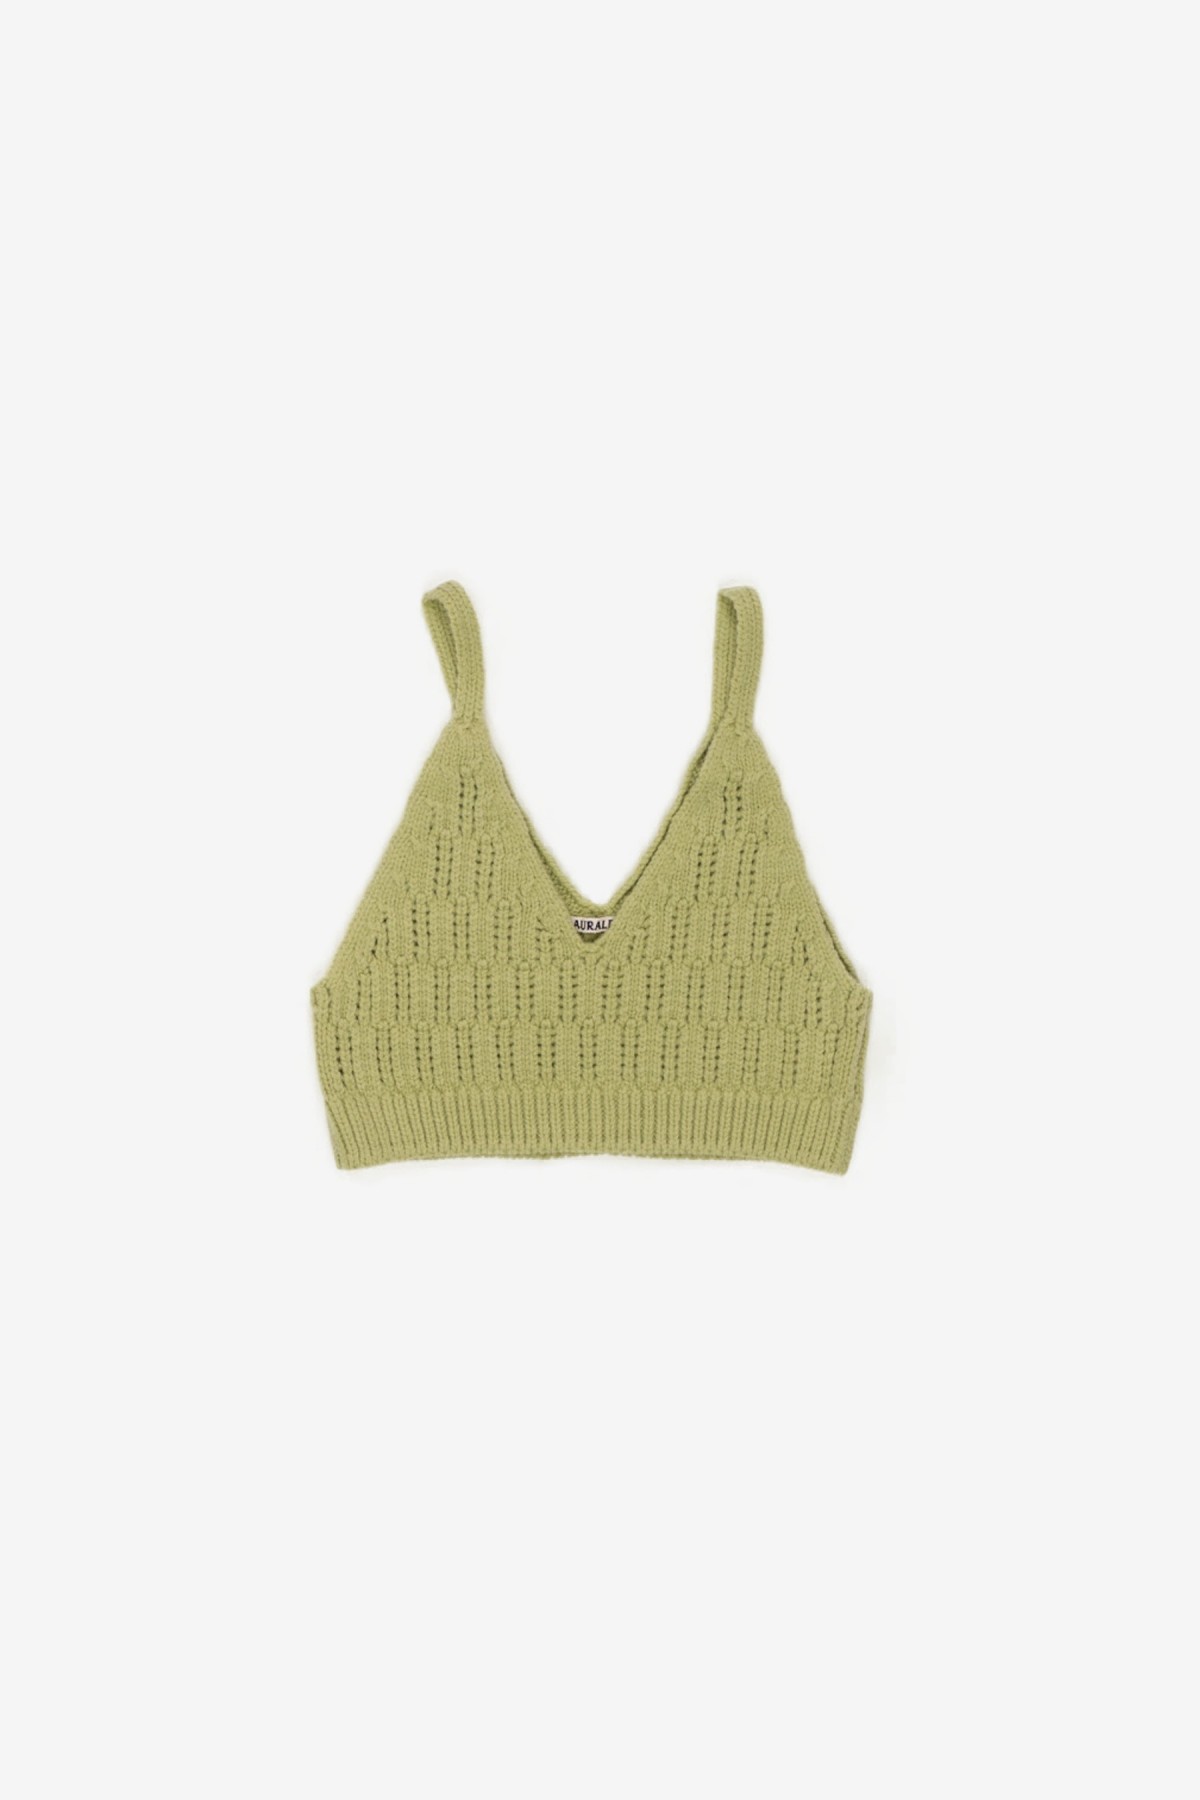 Auralee Wool Cord Rib Knit Camisole in Light Green